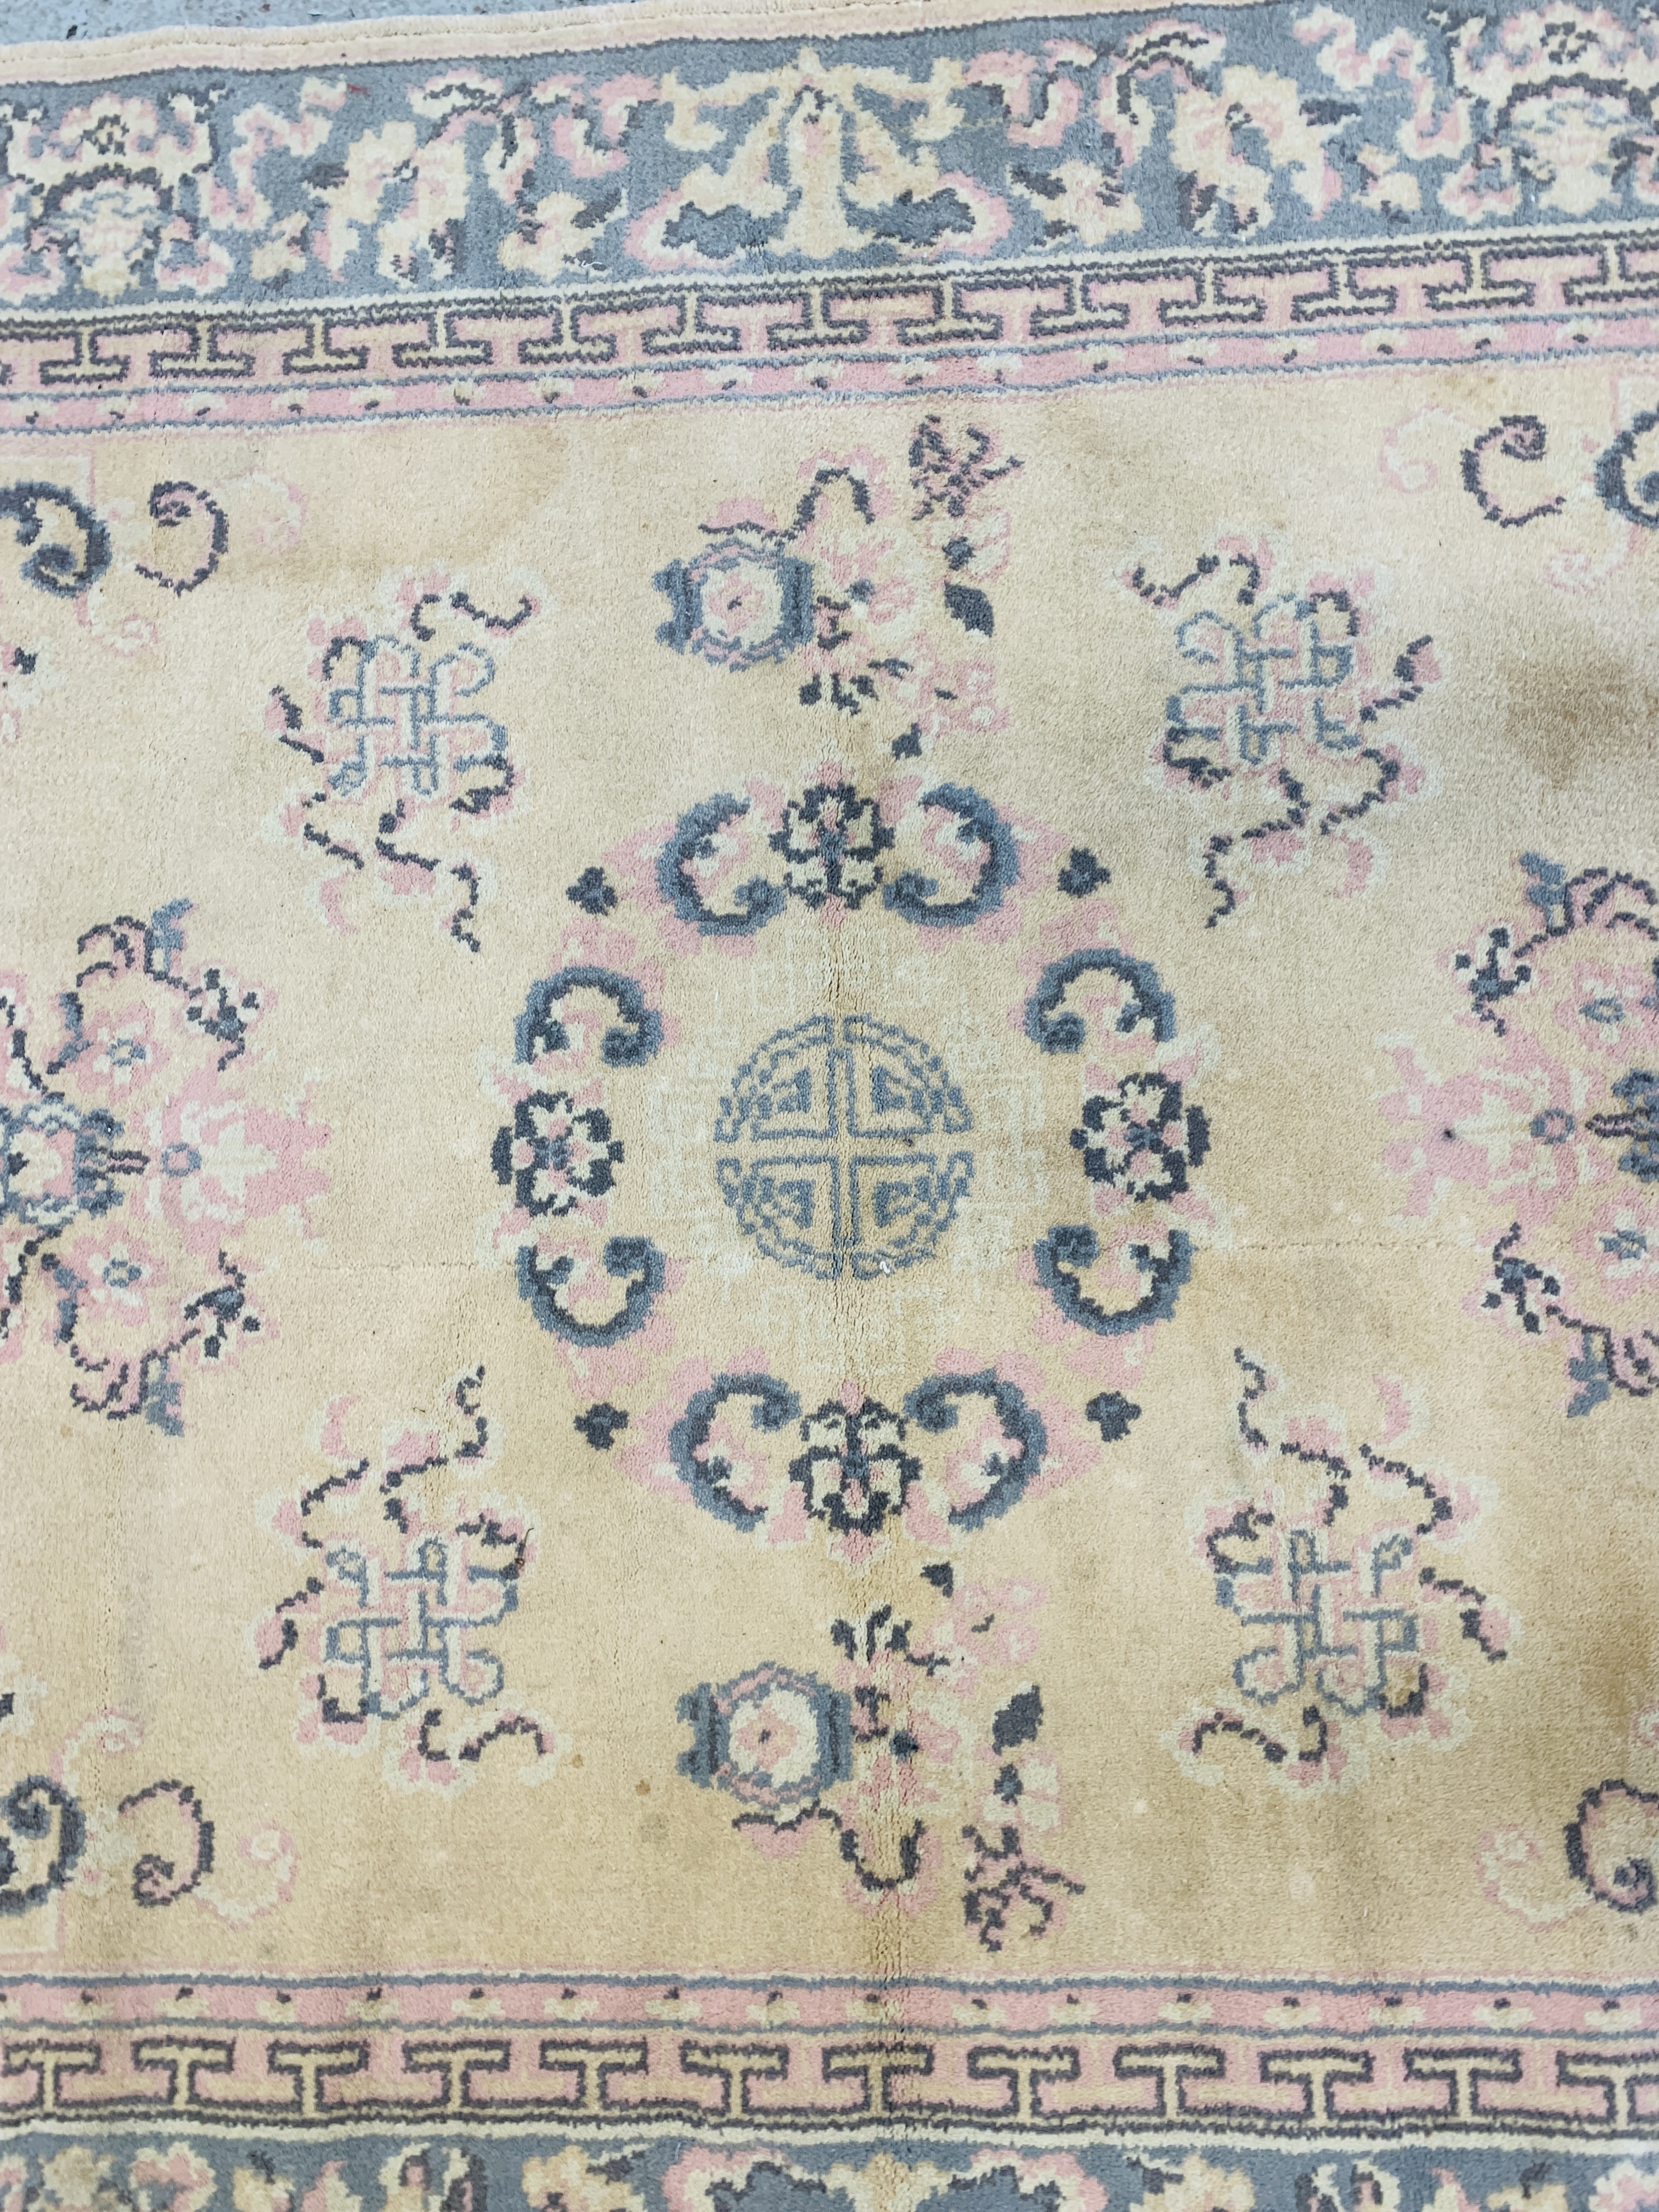 A CHINESE RUG BLUE / PINK PATTERNED ON BEIGE GROUND 1.7M X 1.25M. - Image 3 of 4